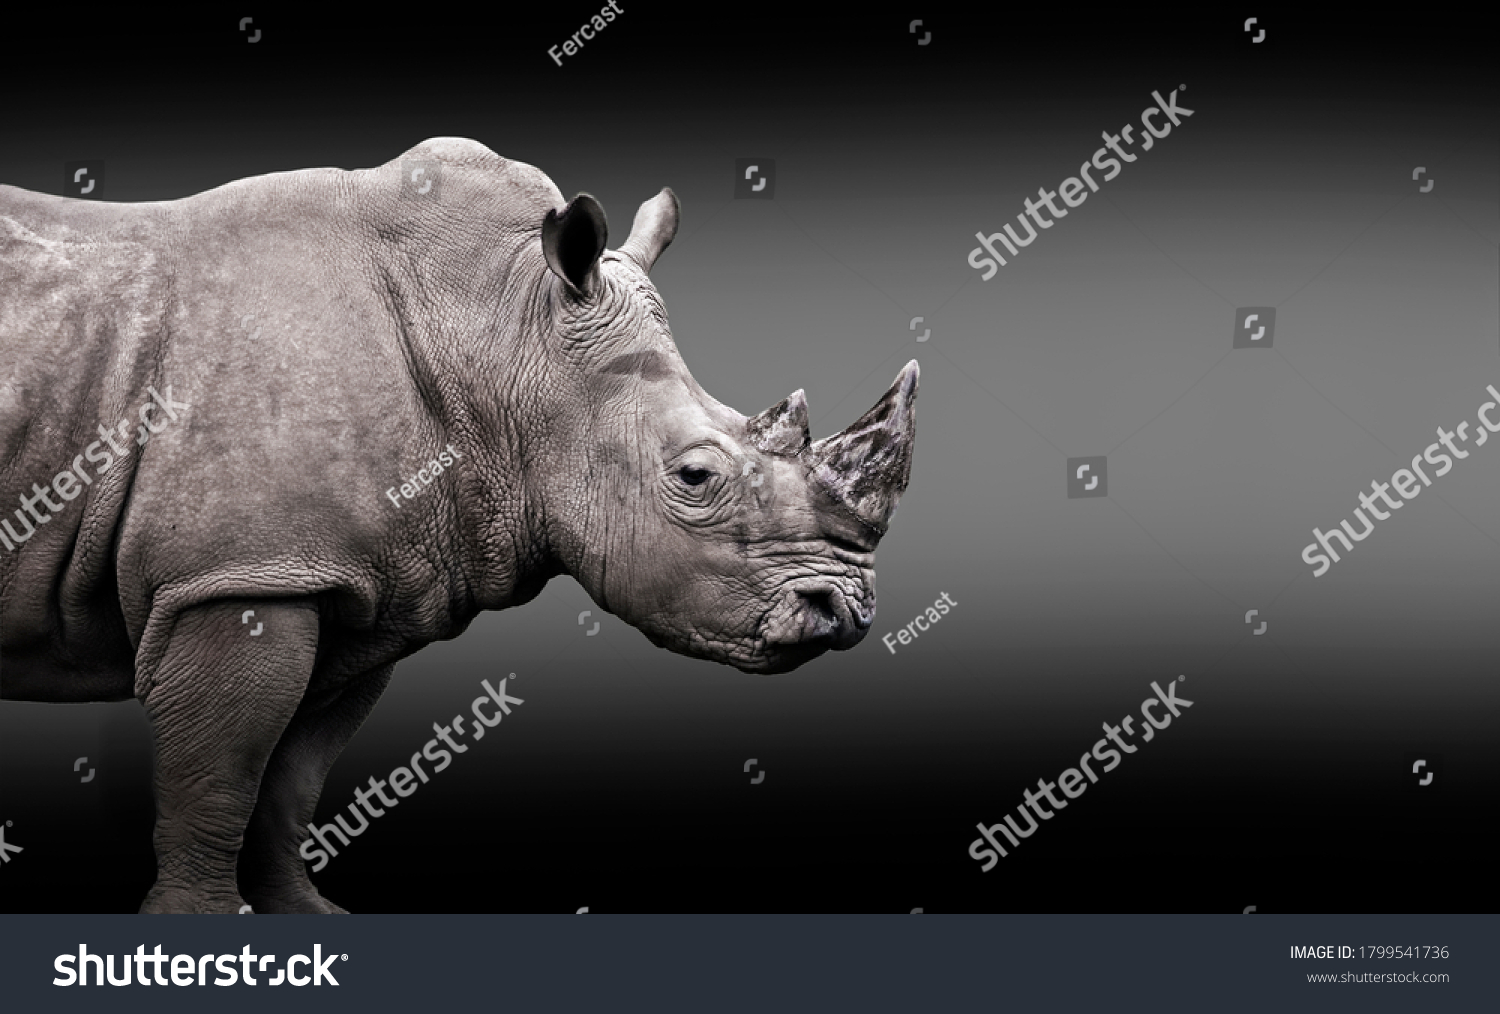 Edited portrait of a white rhinoceros (Ceratotherium simum) isolated with a black and white background with copy space for text. Endangered african white rhino under risk of extinction.  #1799541736